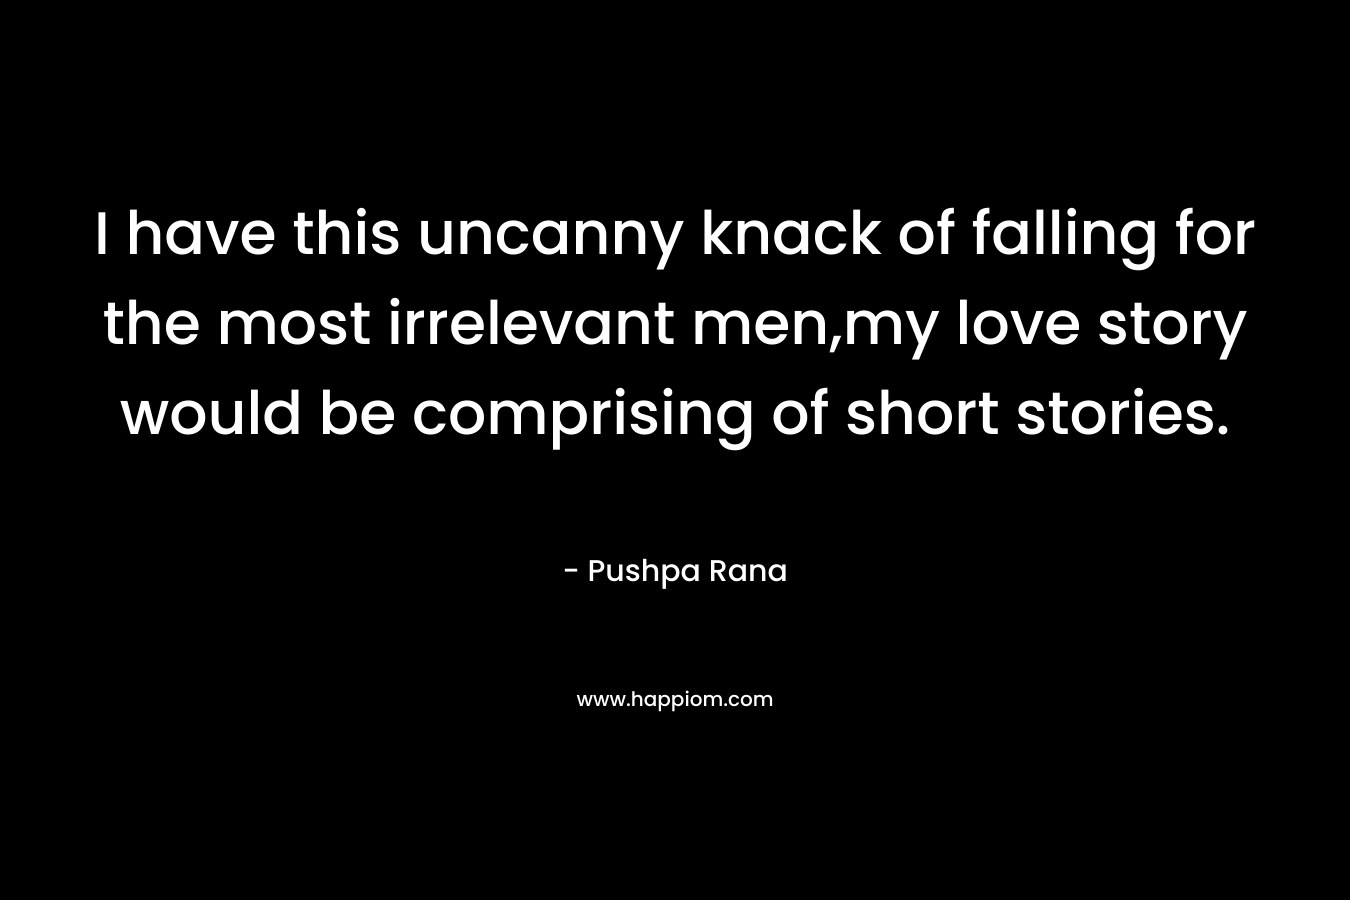 I have this uncanny knack of falling for the most irrelevant men,my love story would be comprising of short stories.